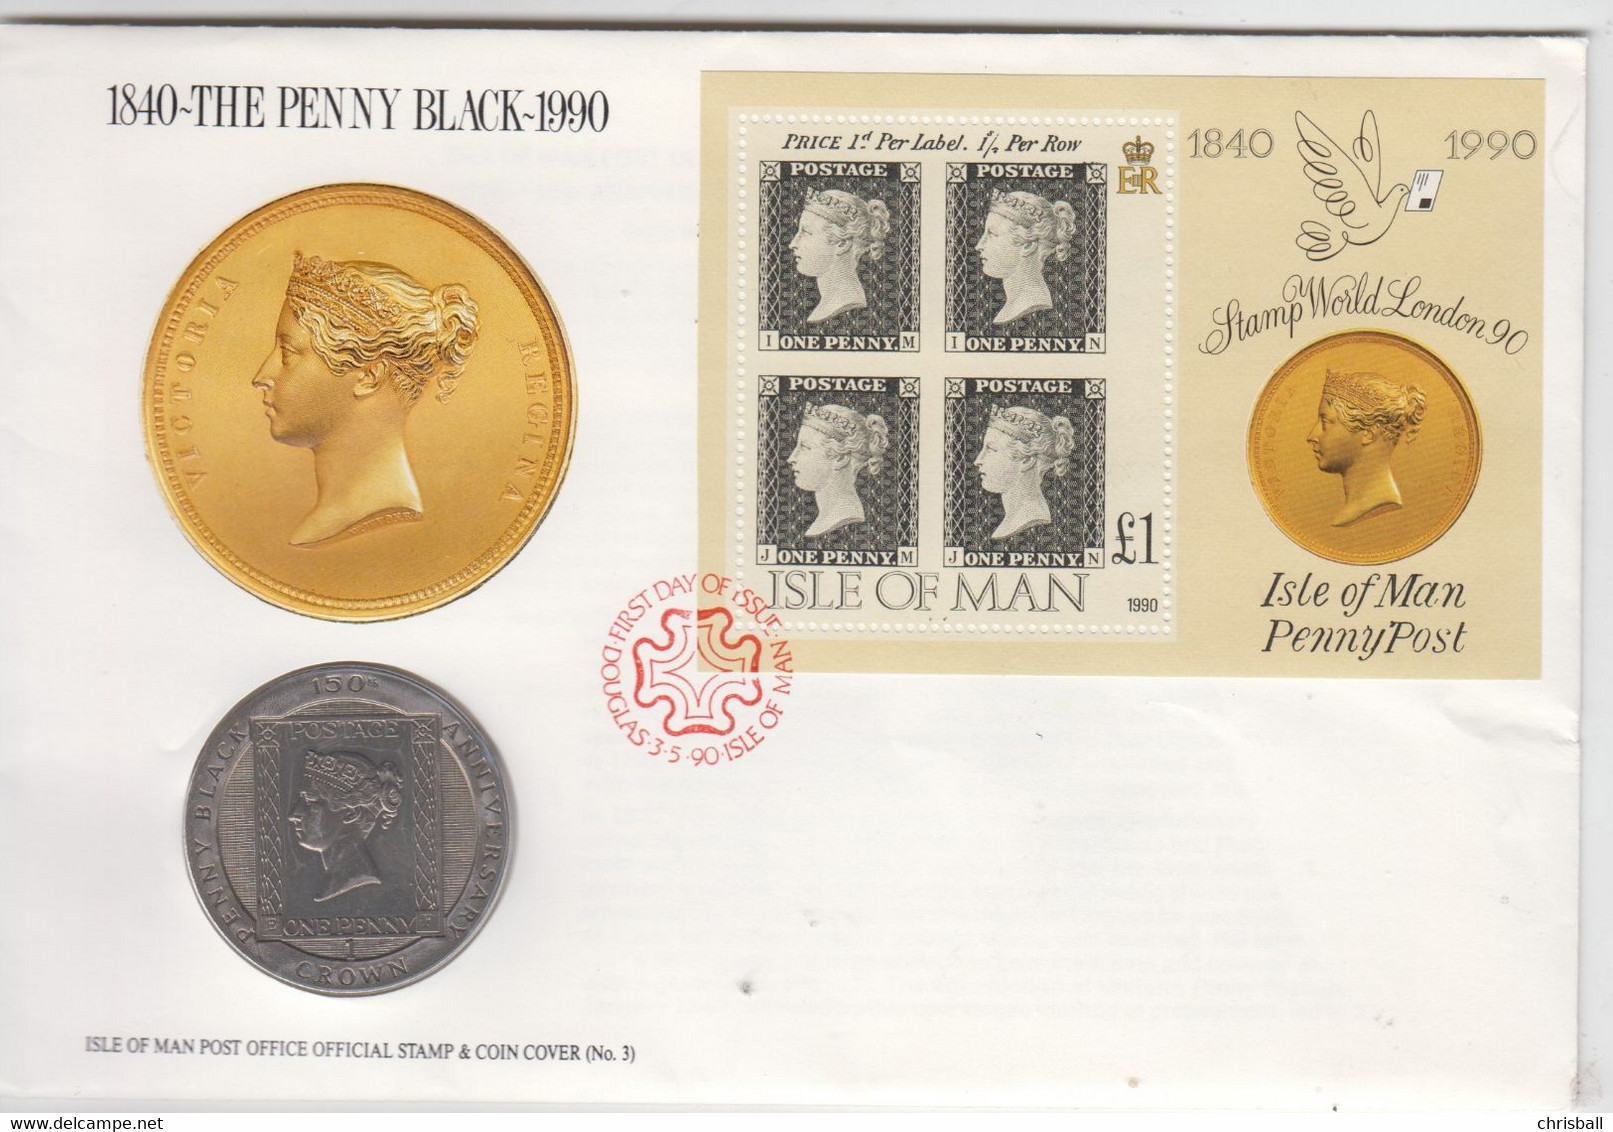 Isle Of Man 1990 Crown Coin Cover - Penny Black - Isle Of Man